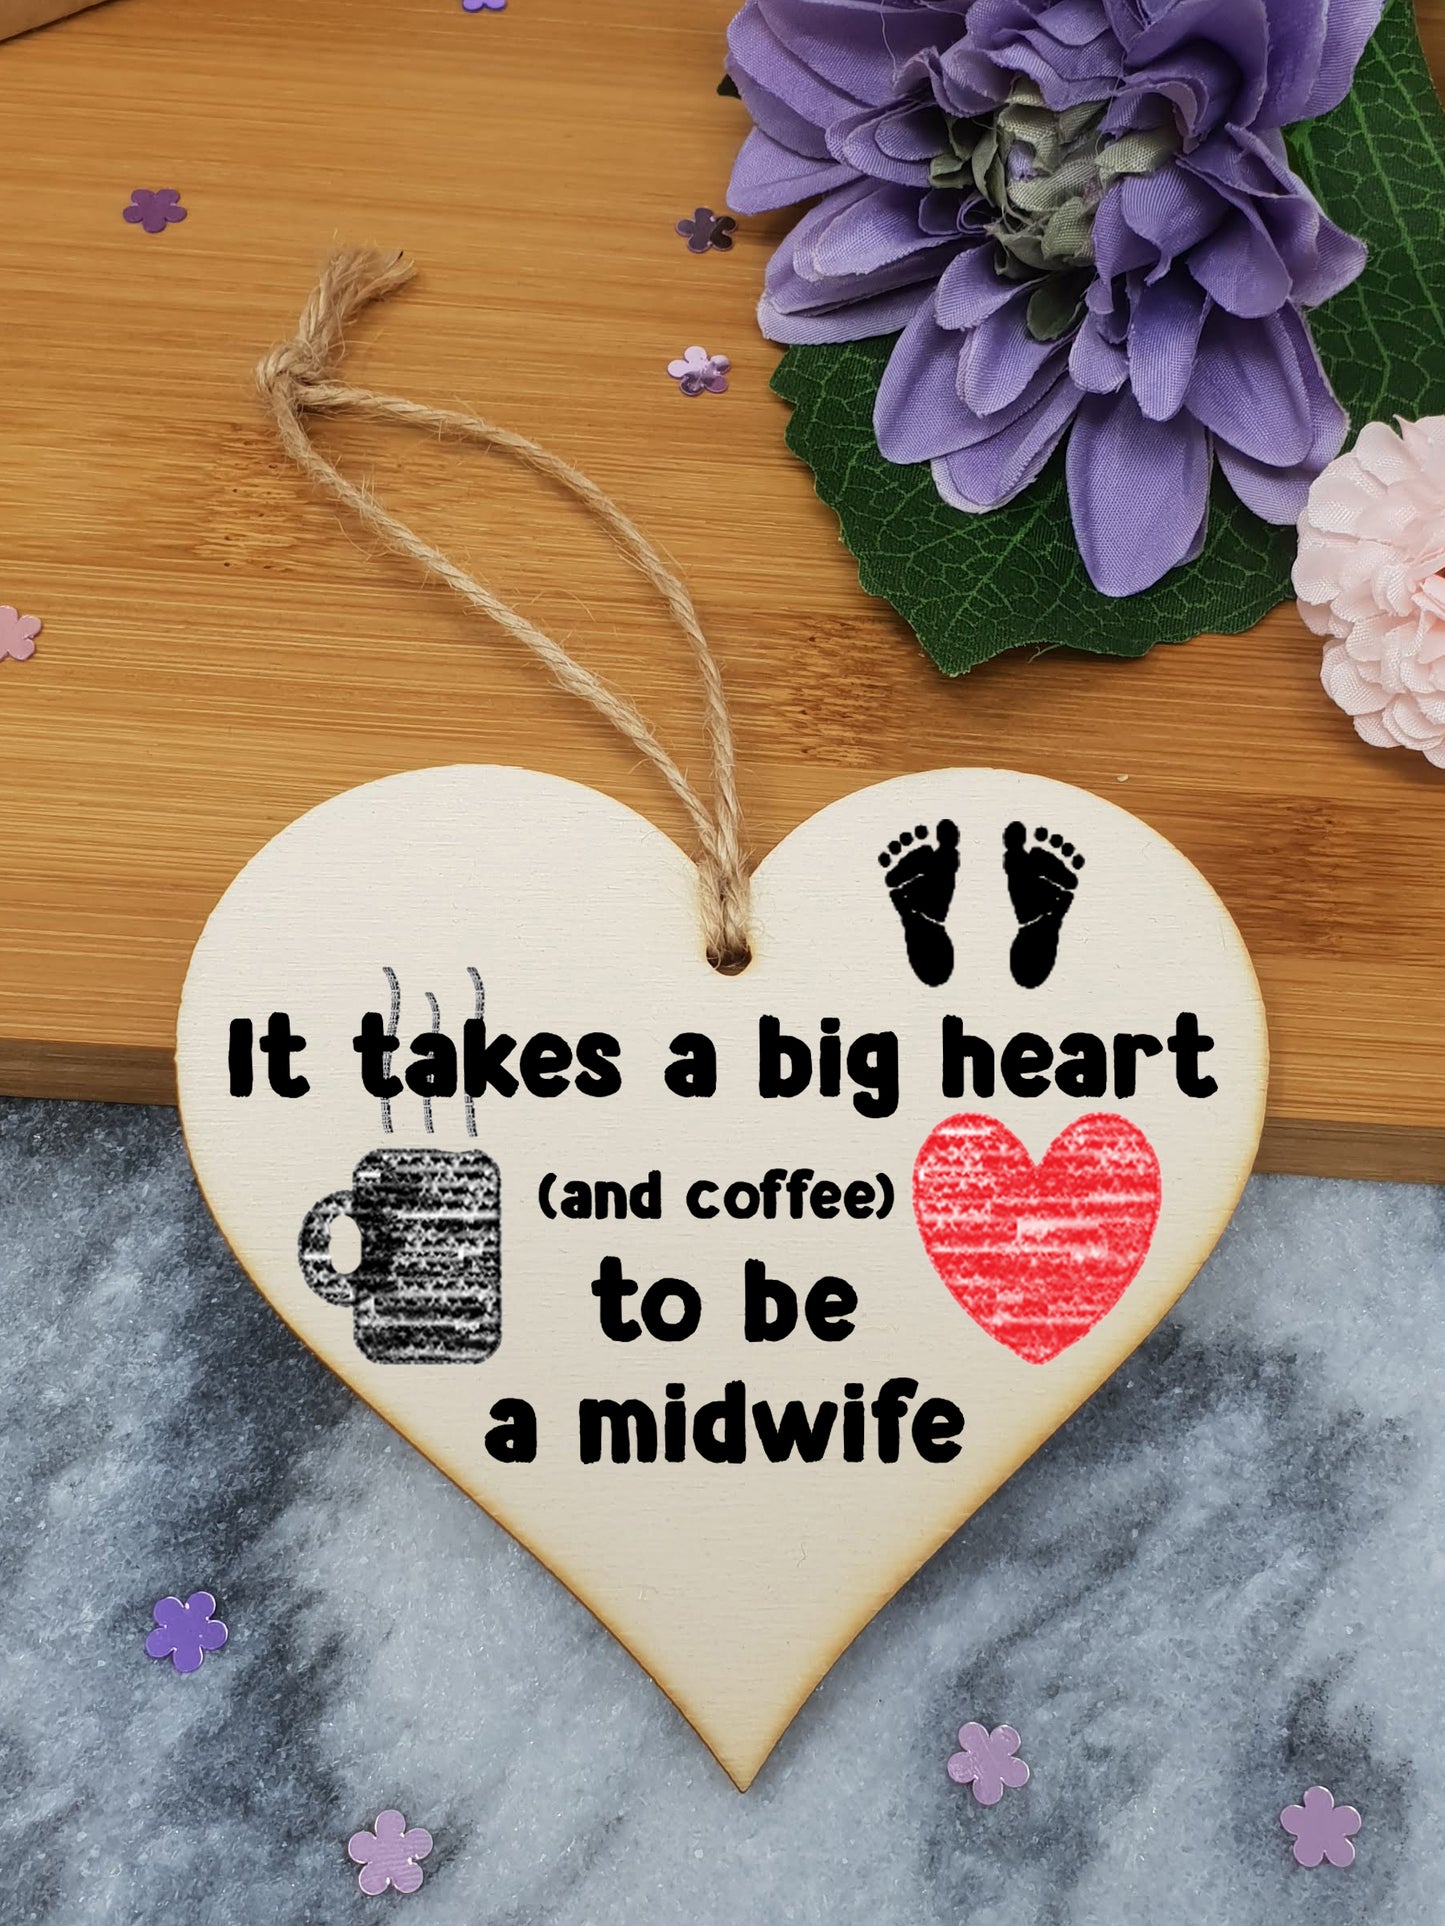 Handmade Wooden Hanging Heart Plaque Gift for a Great Midwife Funny Thank You Keepsake